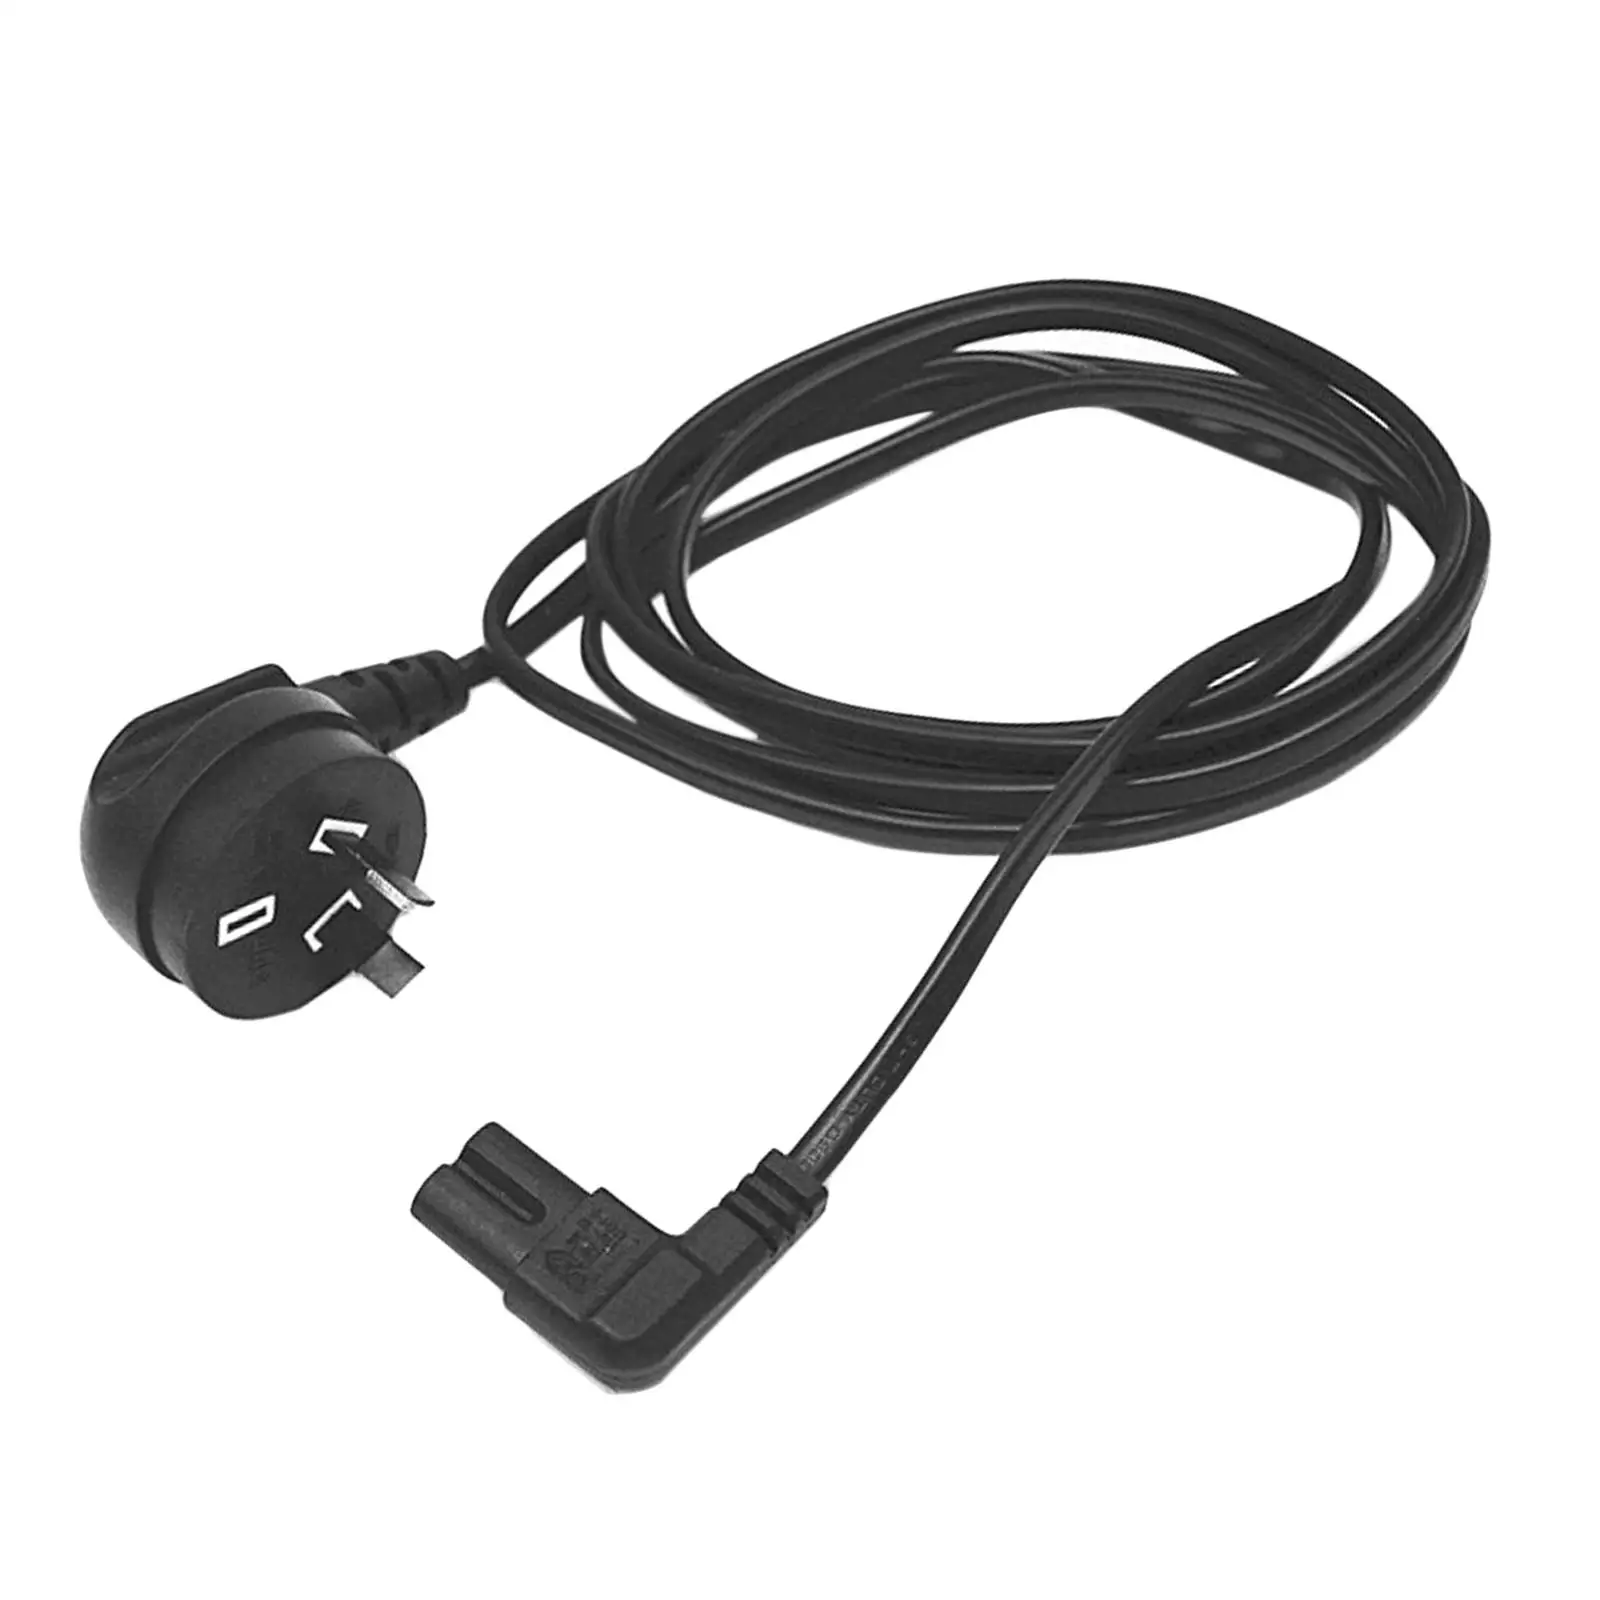 Australia 2 Pin Male to C7 side ben Female Power Cable Black Low Resistance Good Conductivity Male to Female